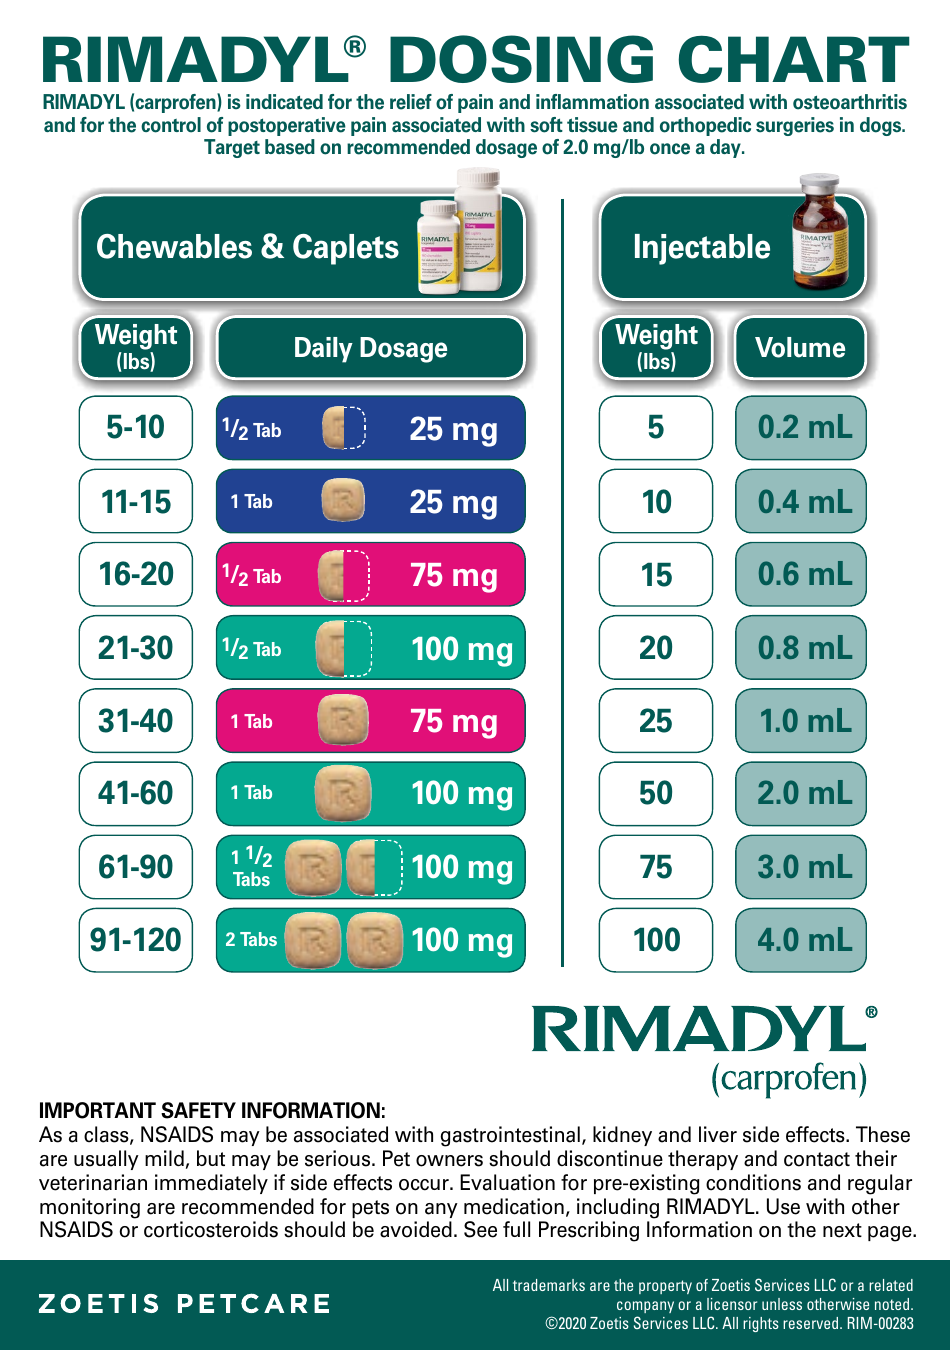 Rimadyl Dosing Chart - simplifie the medication process for dogs and cats